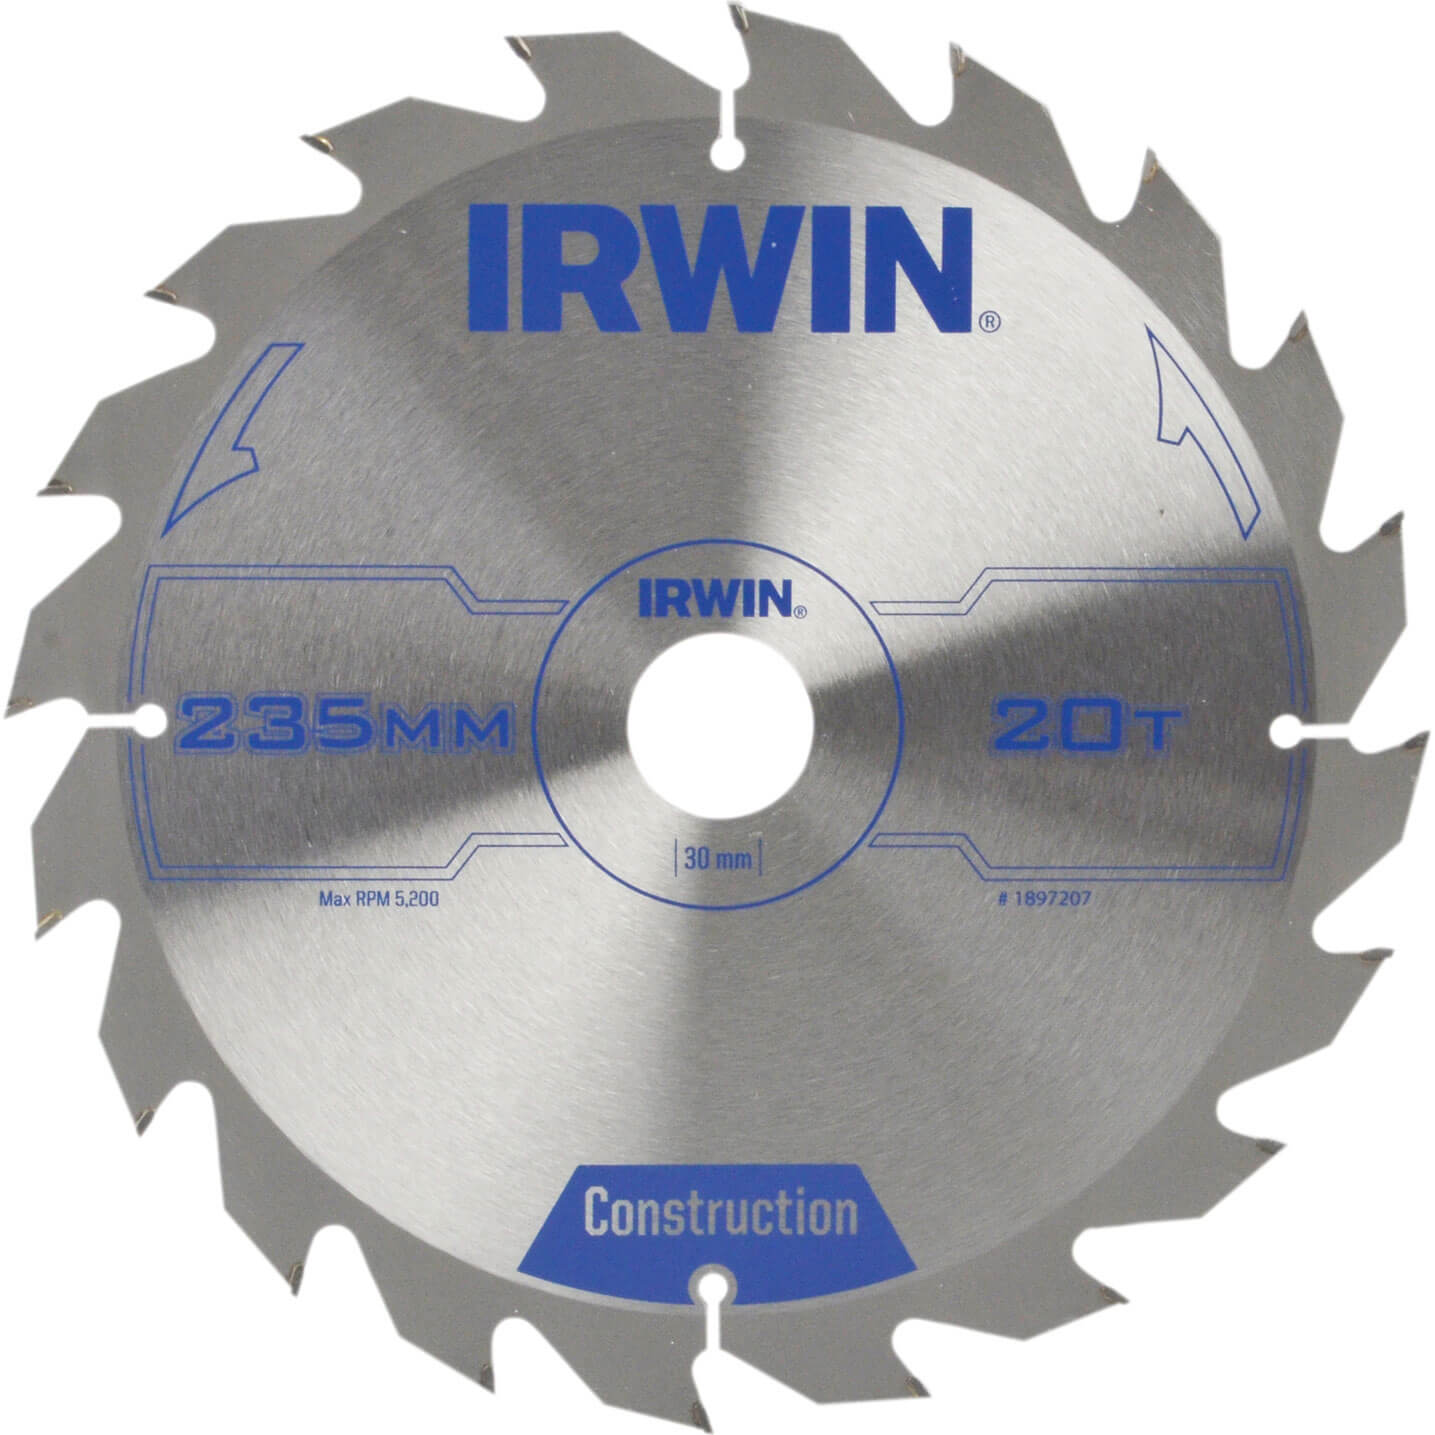 Photo of Irwin Atb Construction Circular Saw Blade 230mm 20t 30mm